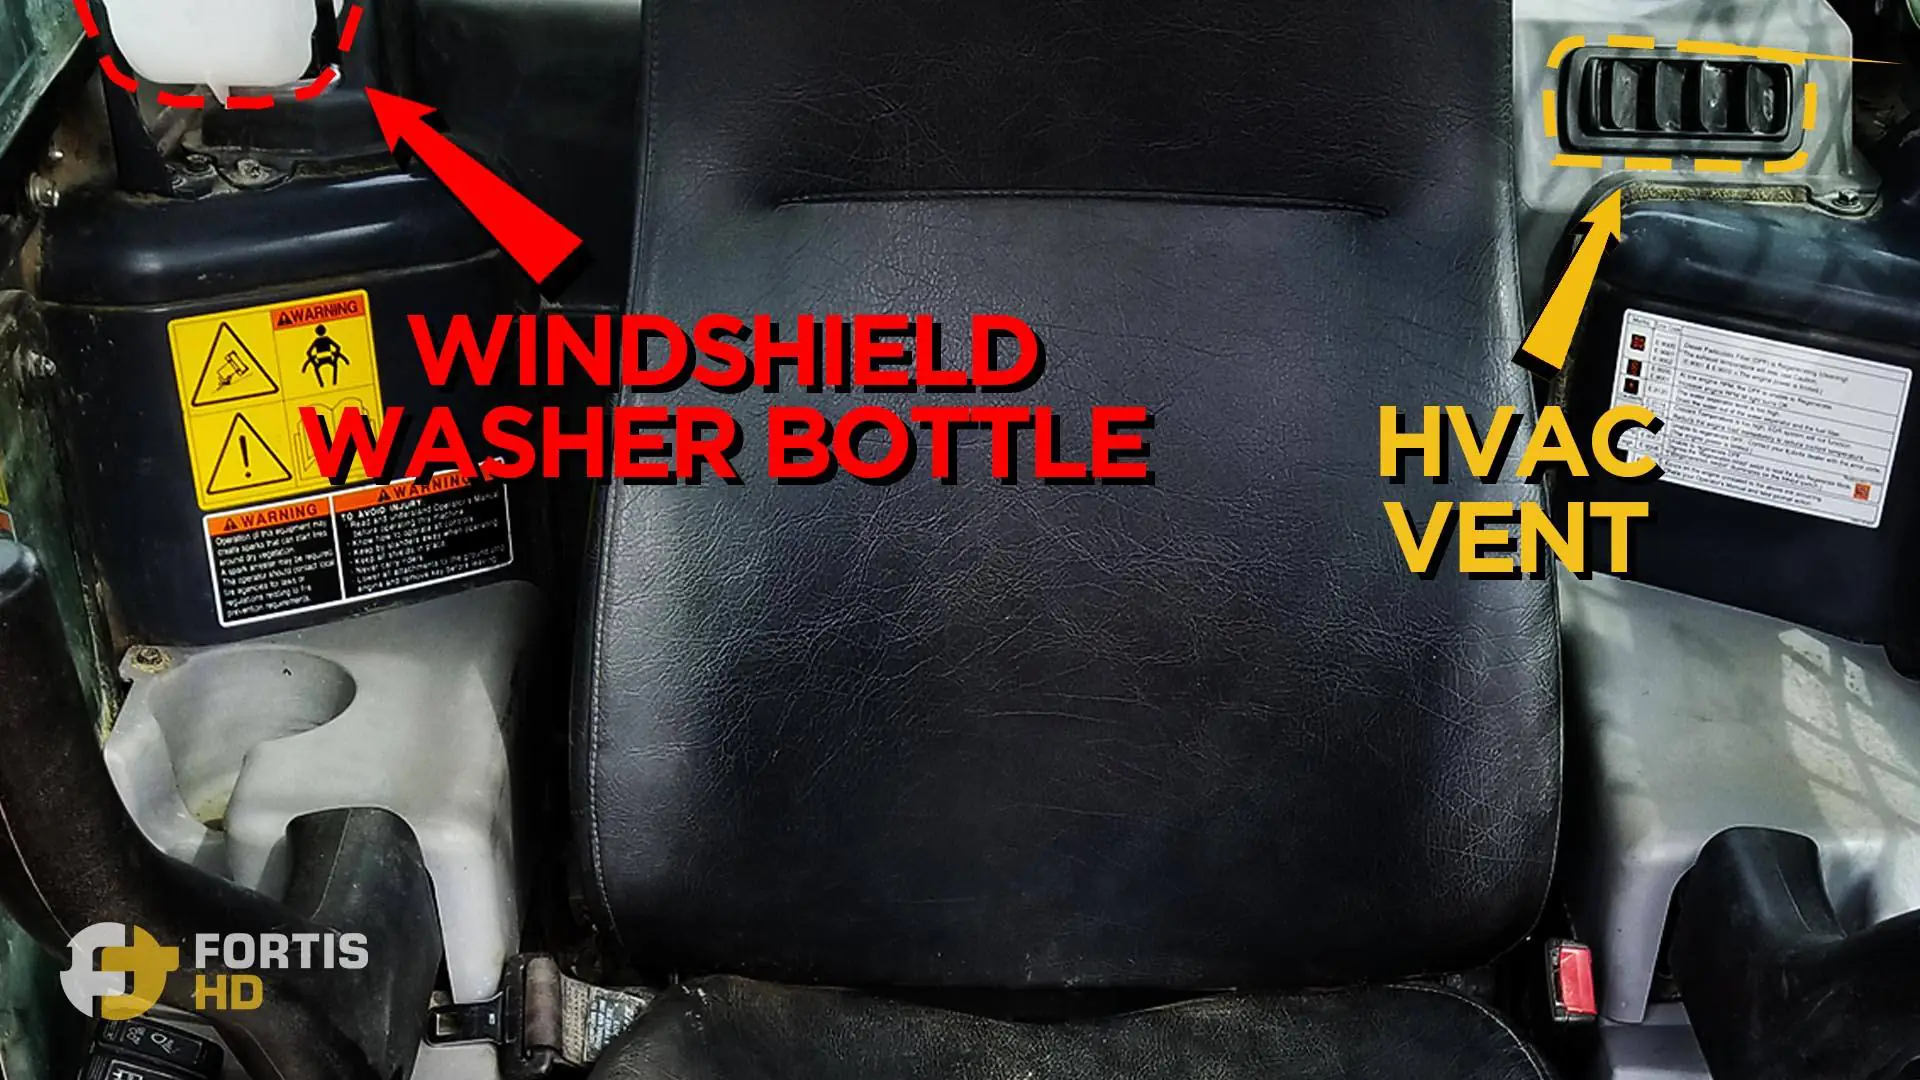 Arrows show the windshield washer bottle and an HVAC vent of the SVL75-2 cab.